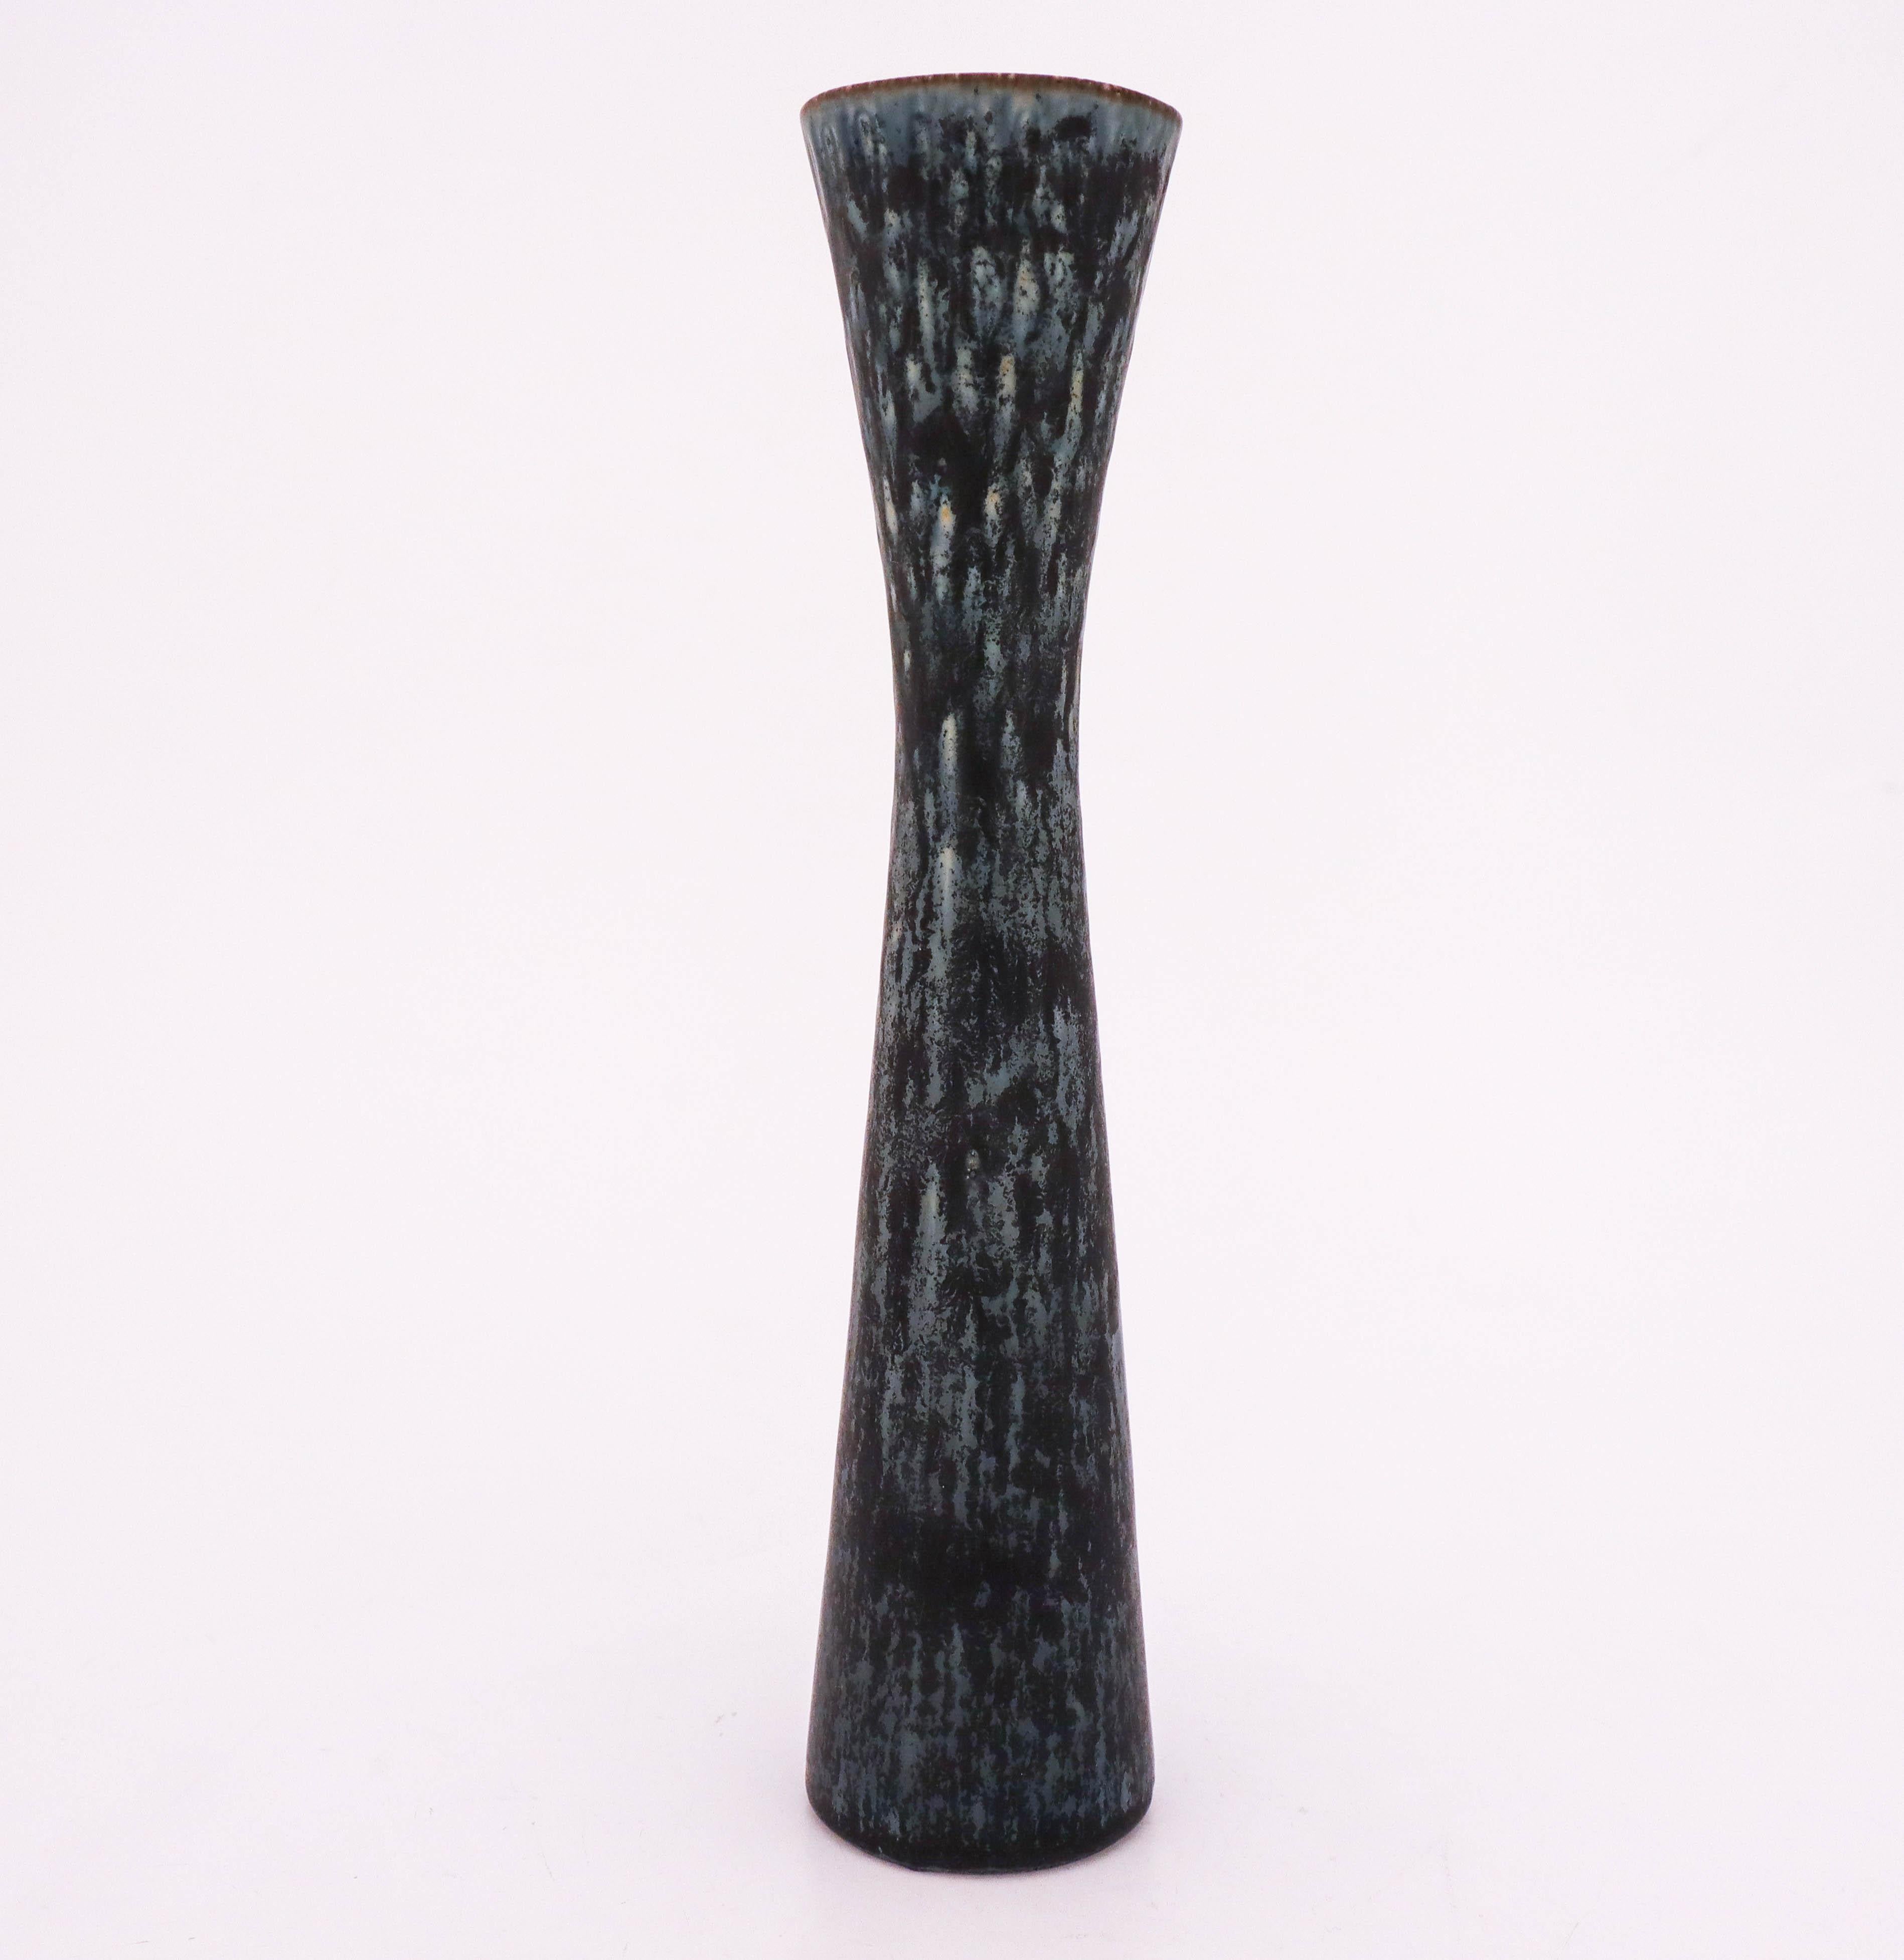 Midcentury Swedish vase in stoneware by Rörstrand, designed by Carl-Harry Stålhane. This tall and minimalistic vase has an excellent glaze and is in very good vintage condition.